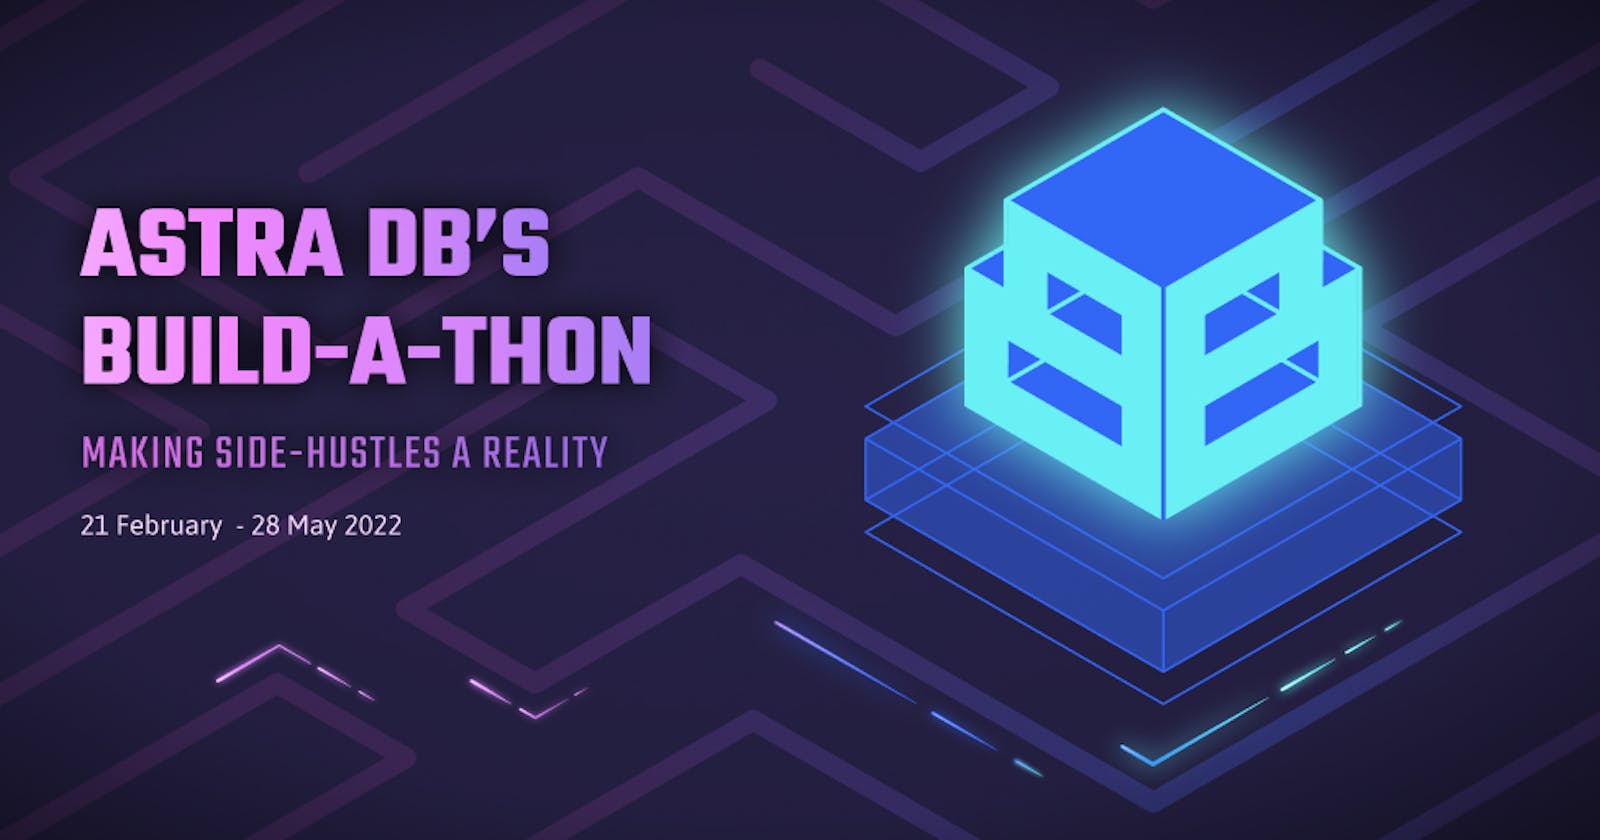 ASTRA DB's BUILD-A-THON
Making Side-Hustles A Reality